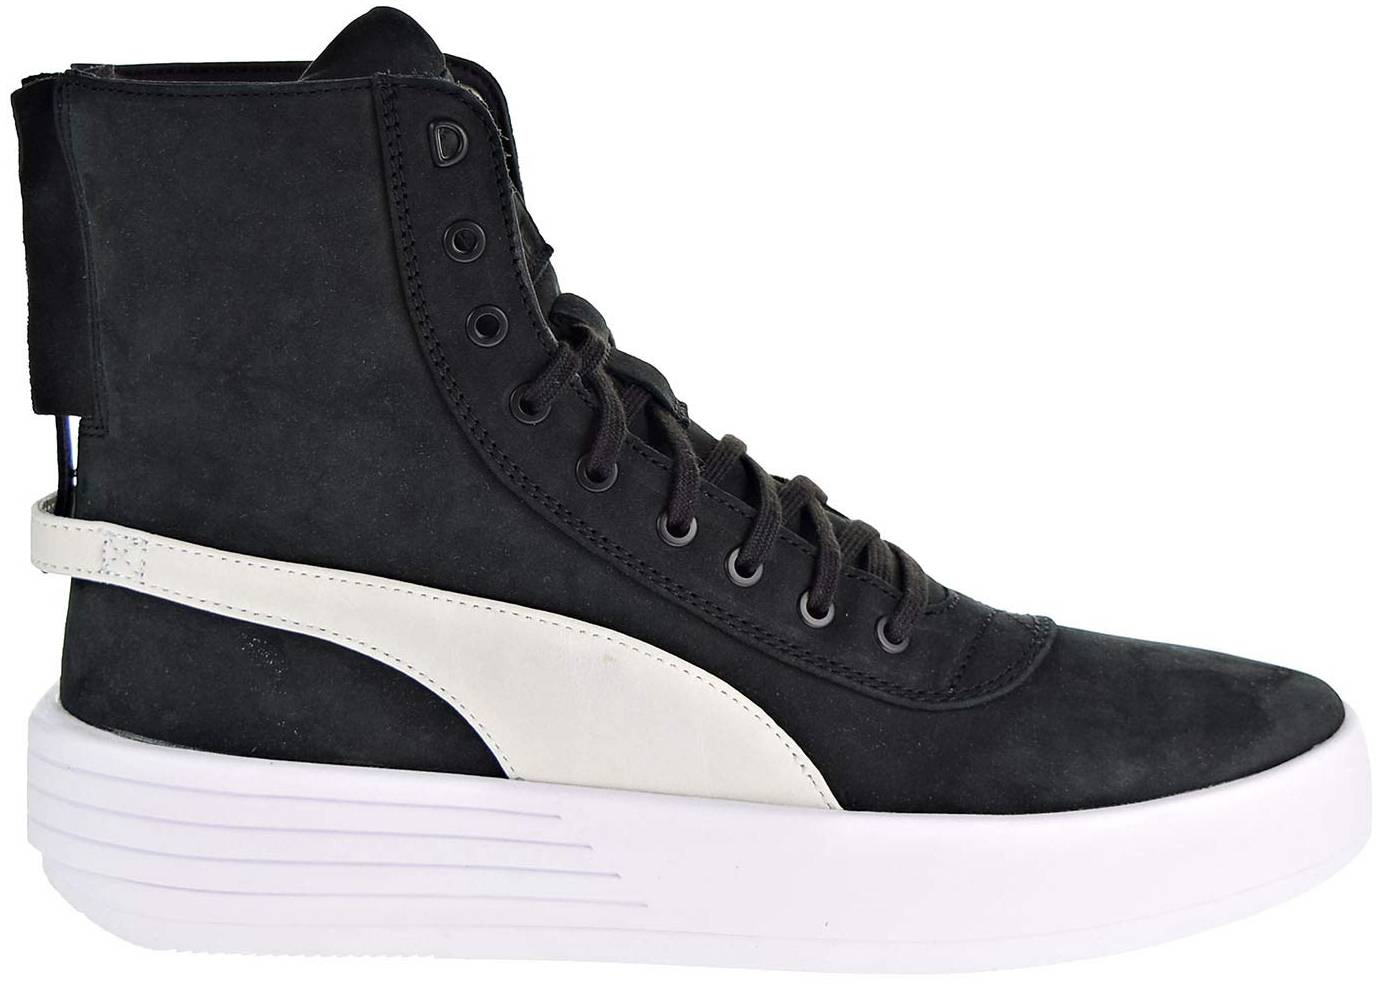 Save 40% on The Weeknd Sneakers (3 